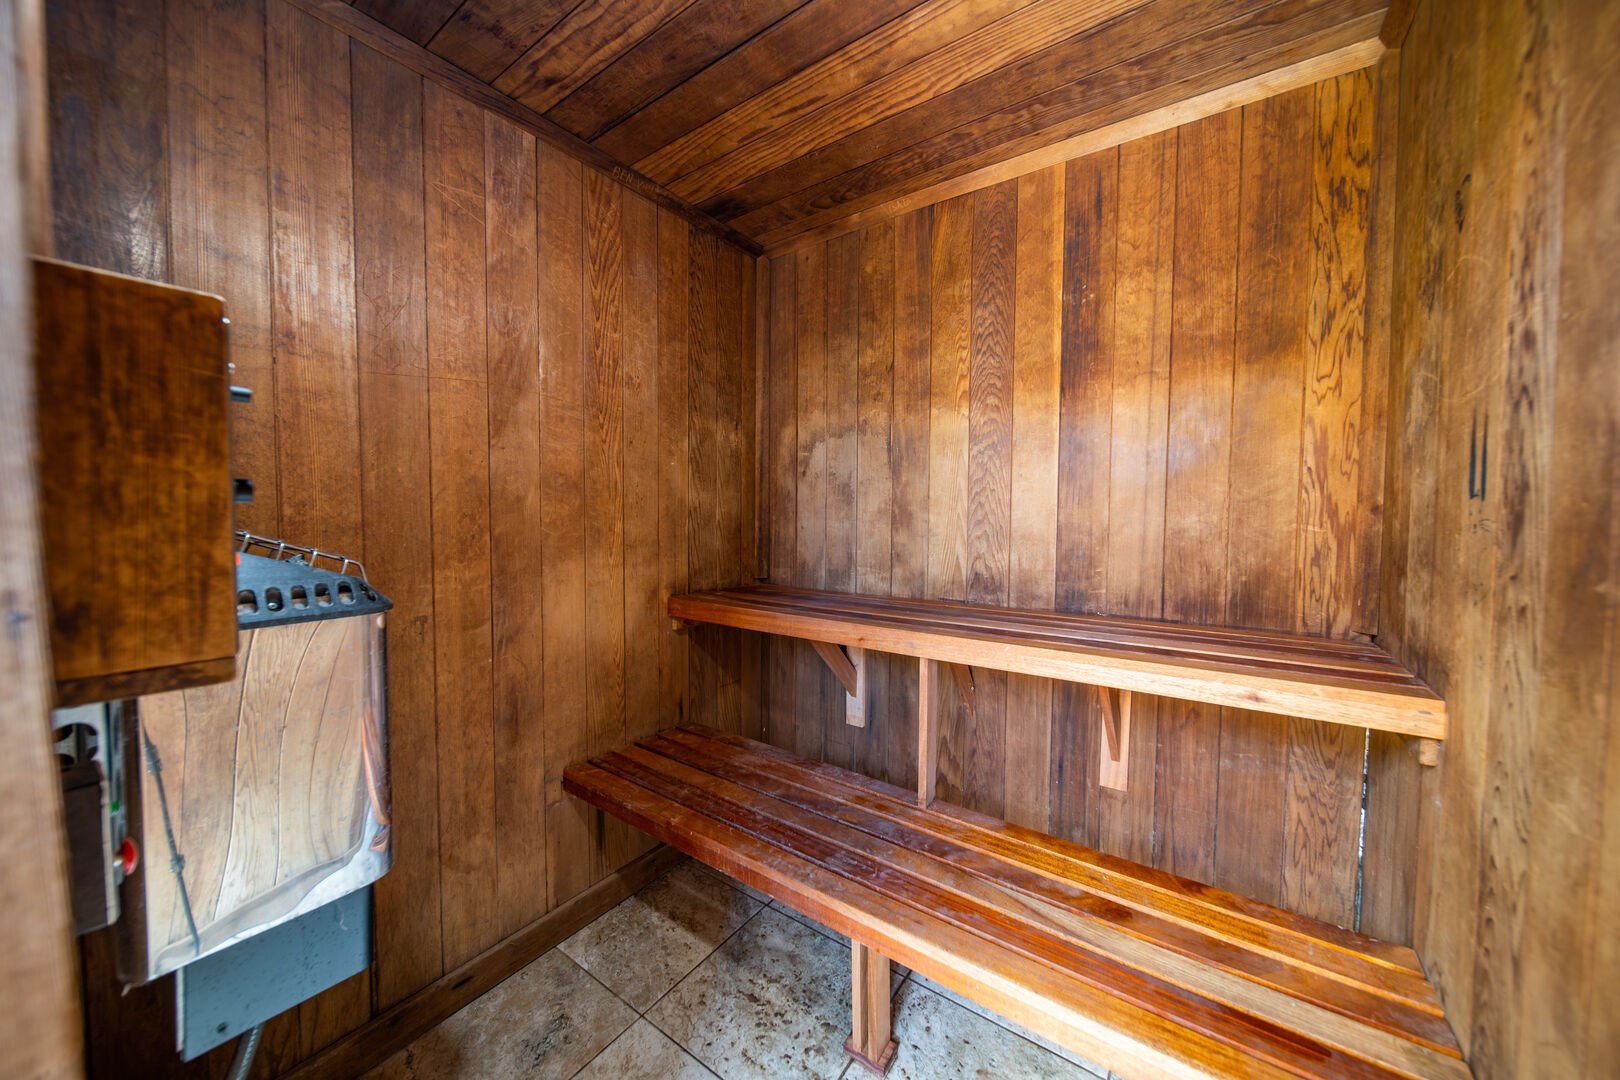 Sauna facilities with separate rooms for men and women